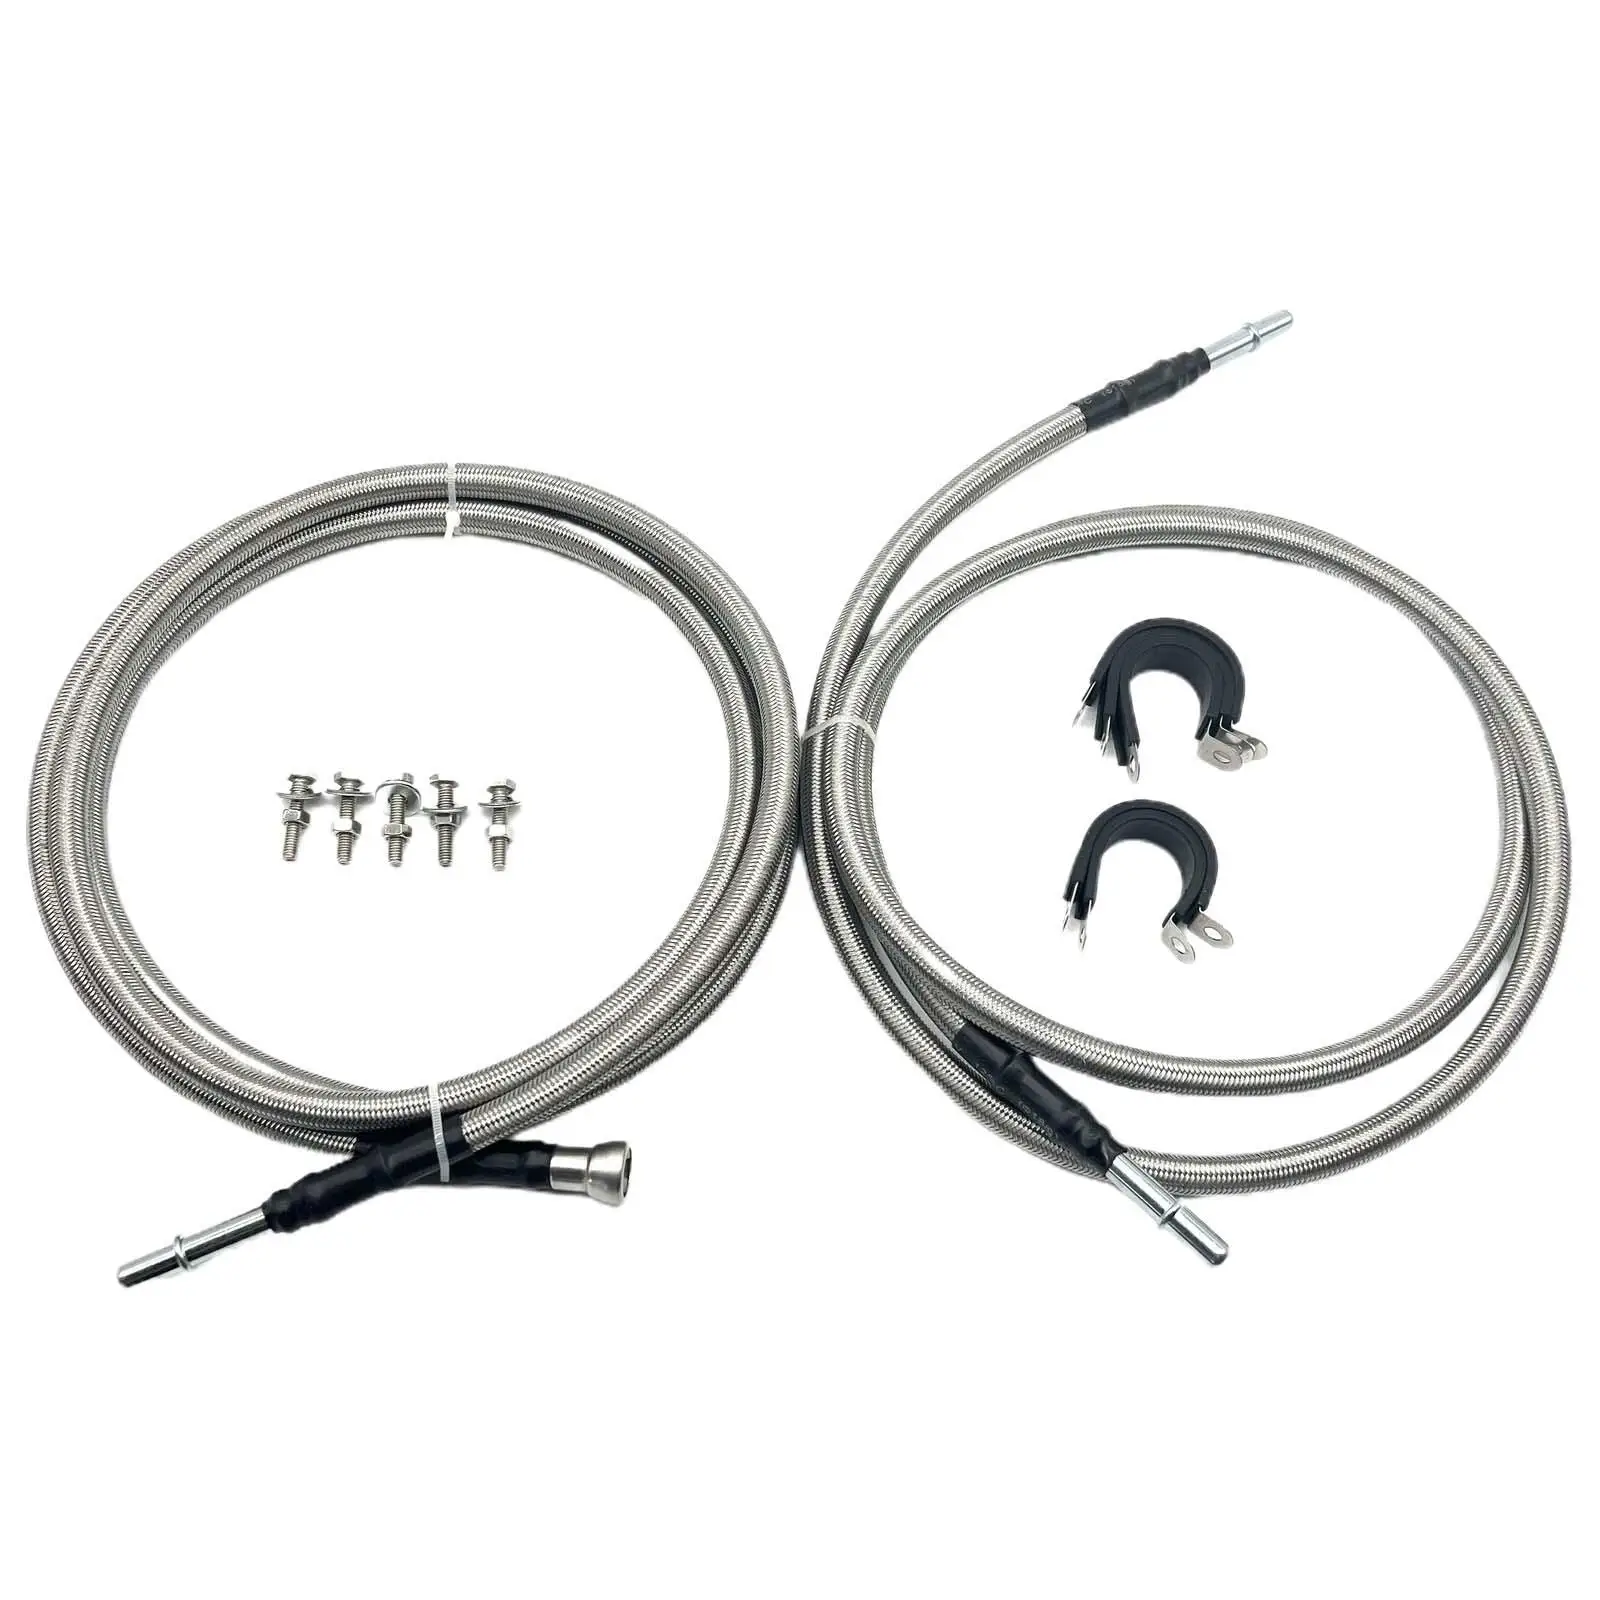 Fuel Line Quick Fix Set Easy to Install Spare Parts Accessory Professional